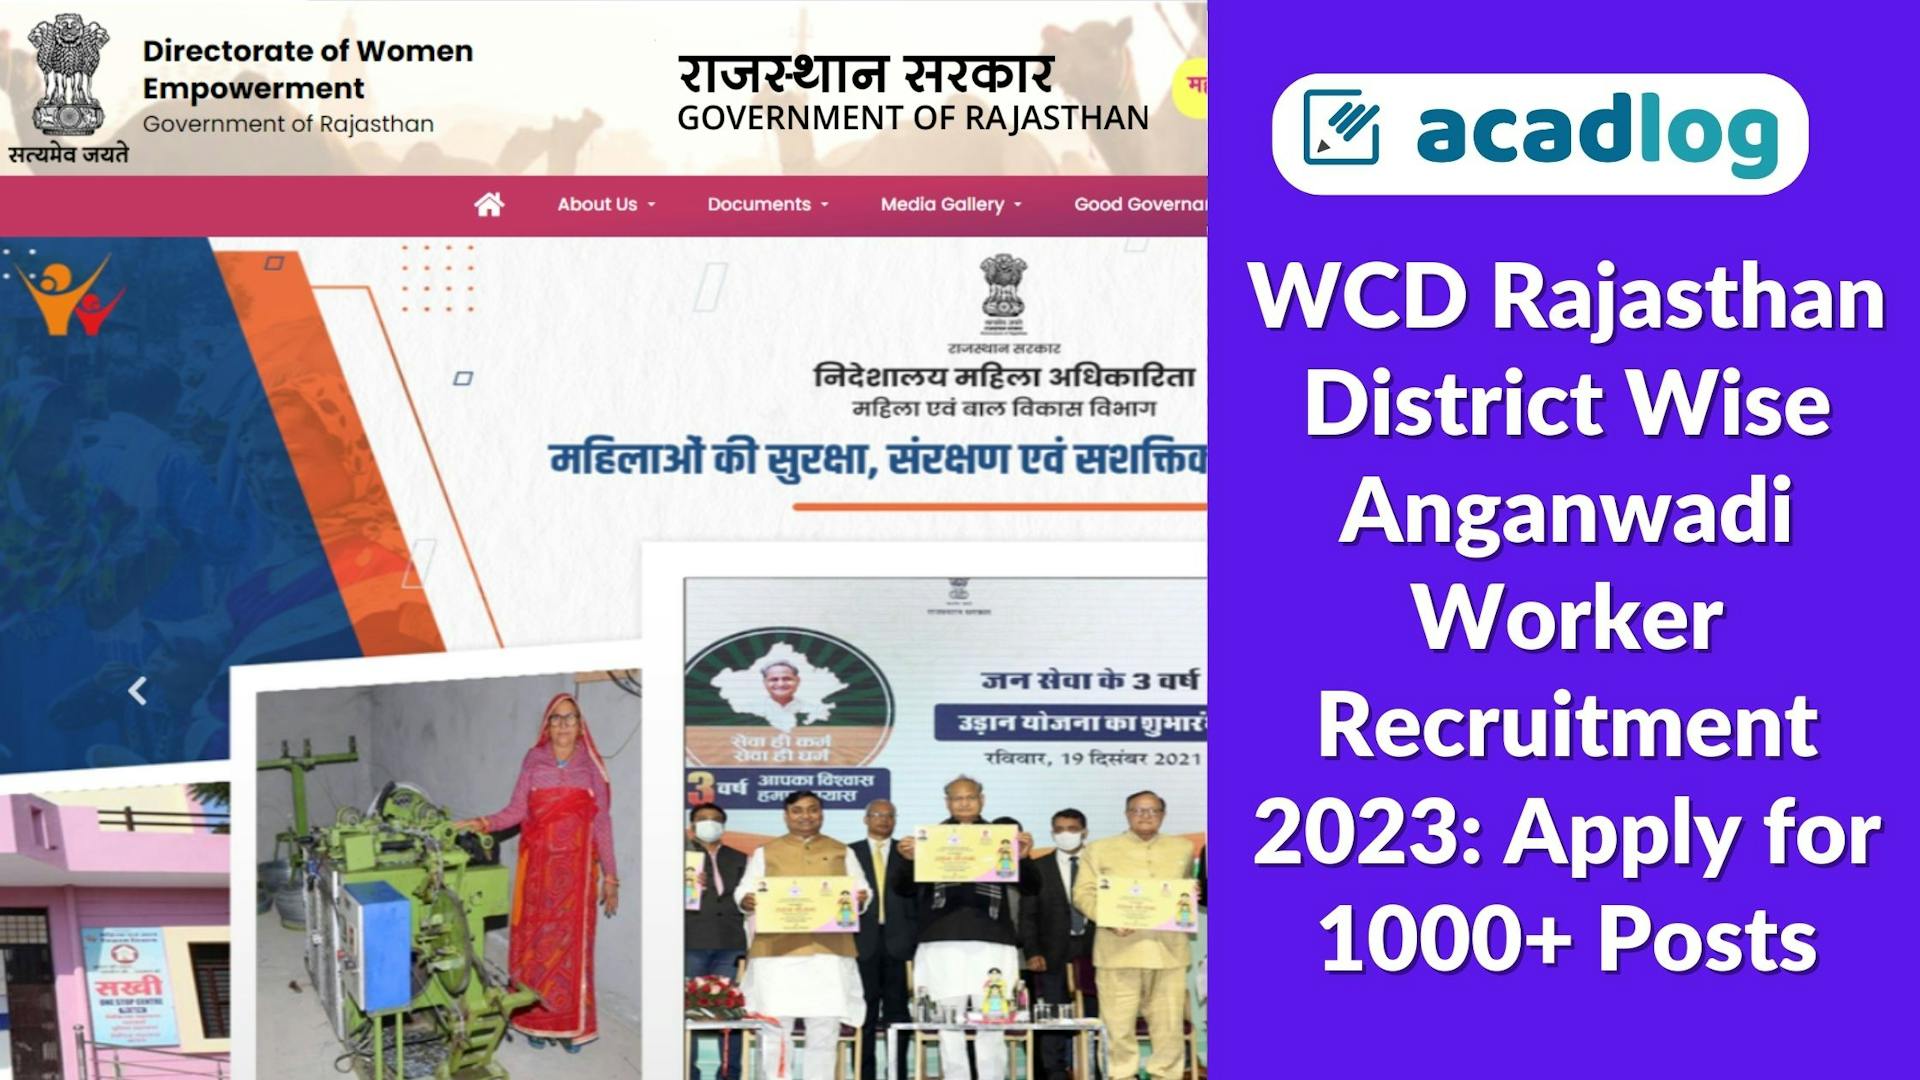 WCD Rajasthan District Wise Anganwadi Worker Recruitment 2023: Apply for 1000+ Posts